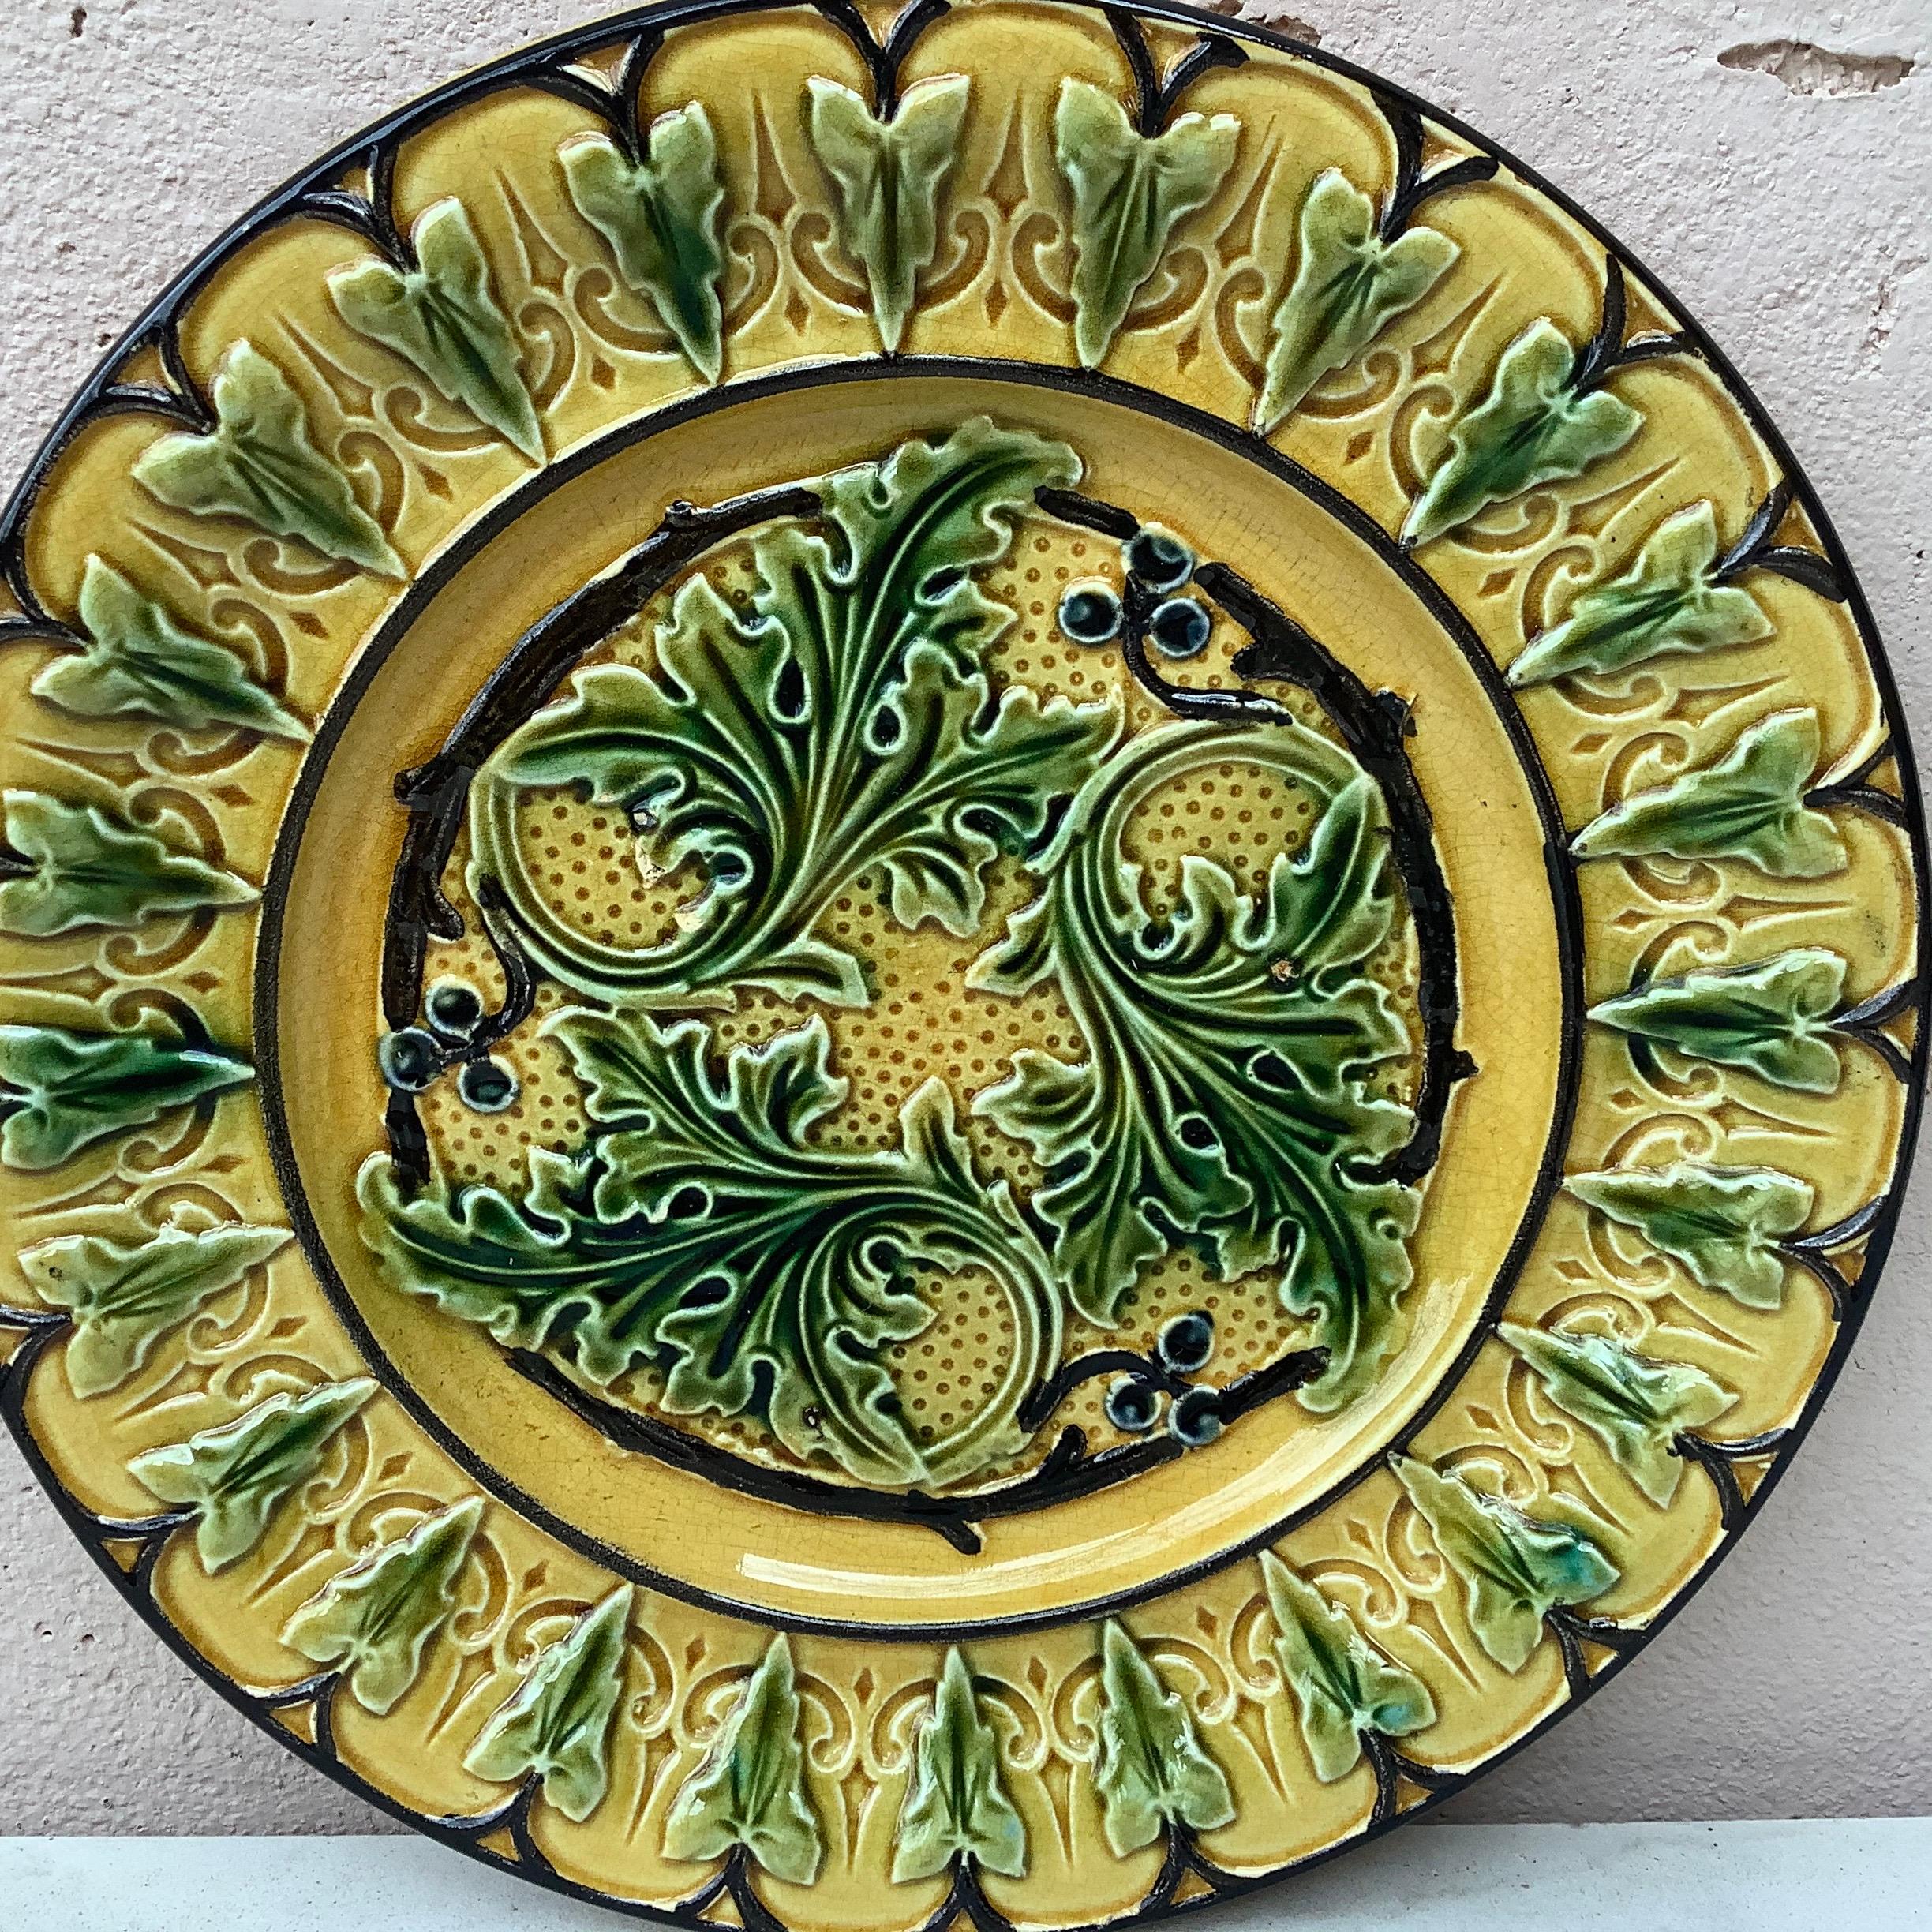 French Majolica acanthus leaves plates, circa 1880.
Rare yellow background usually found in green.
 